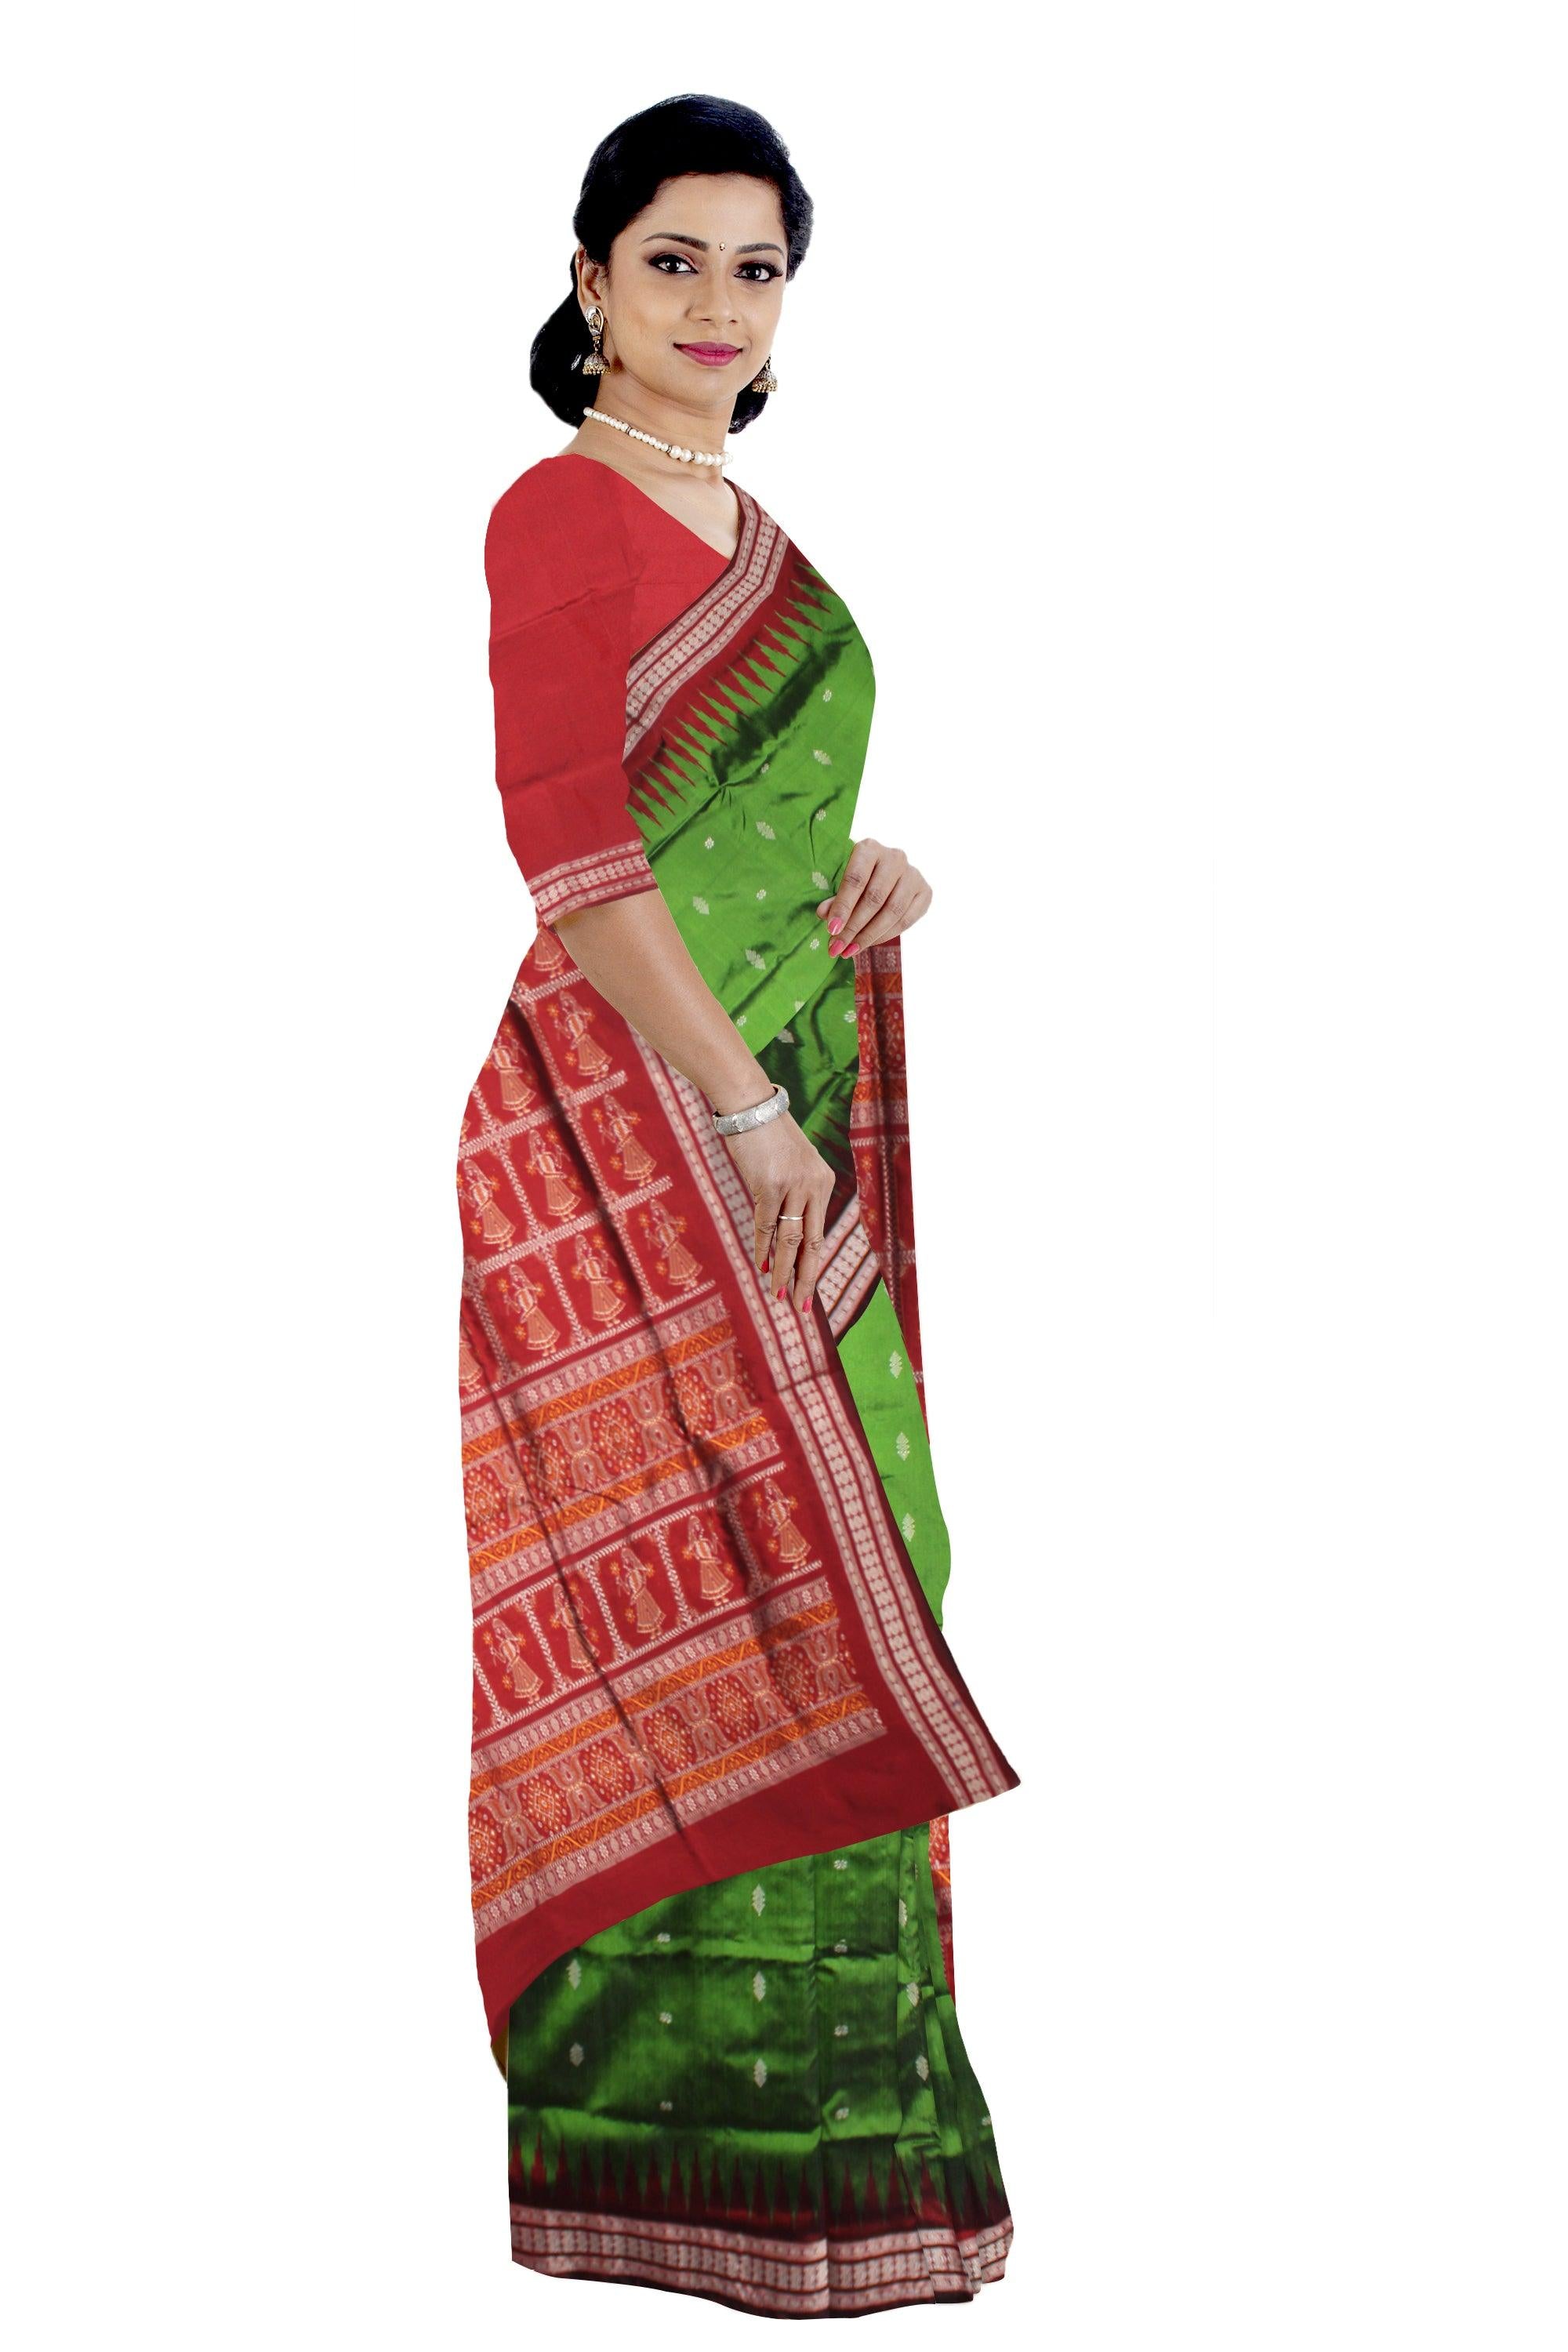 MARRAIGE COLLECTION SMALL BOOTY PATTERN PATA  SAREE IS GREEN AND  MAROON COLOR BASE, WITH BLOUSE PIECE. - Koshali Arts & Crafts Enterprise